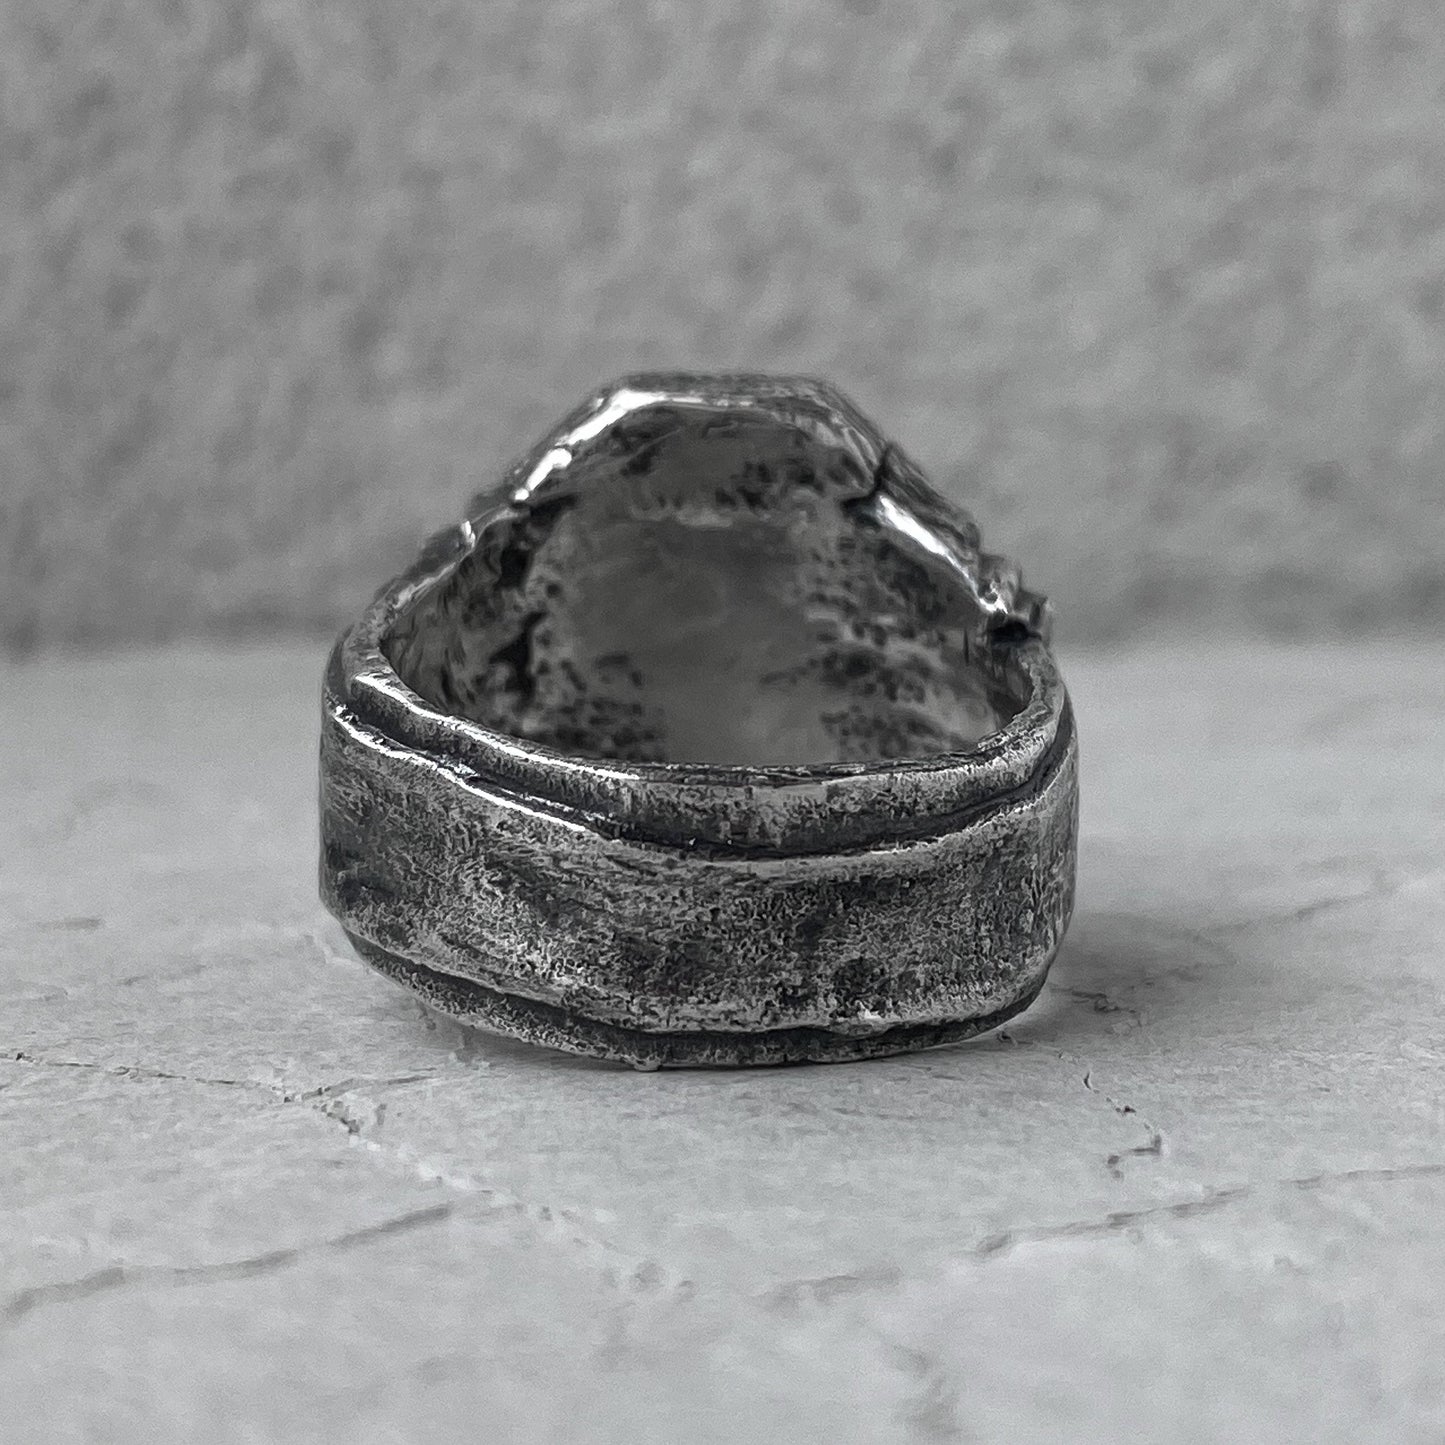 CENTURION ring -a wide brutal ring with an roman motifs and cracks Unusual rings project50g 